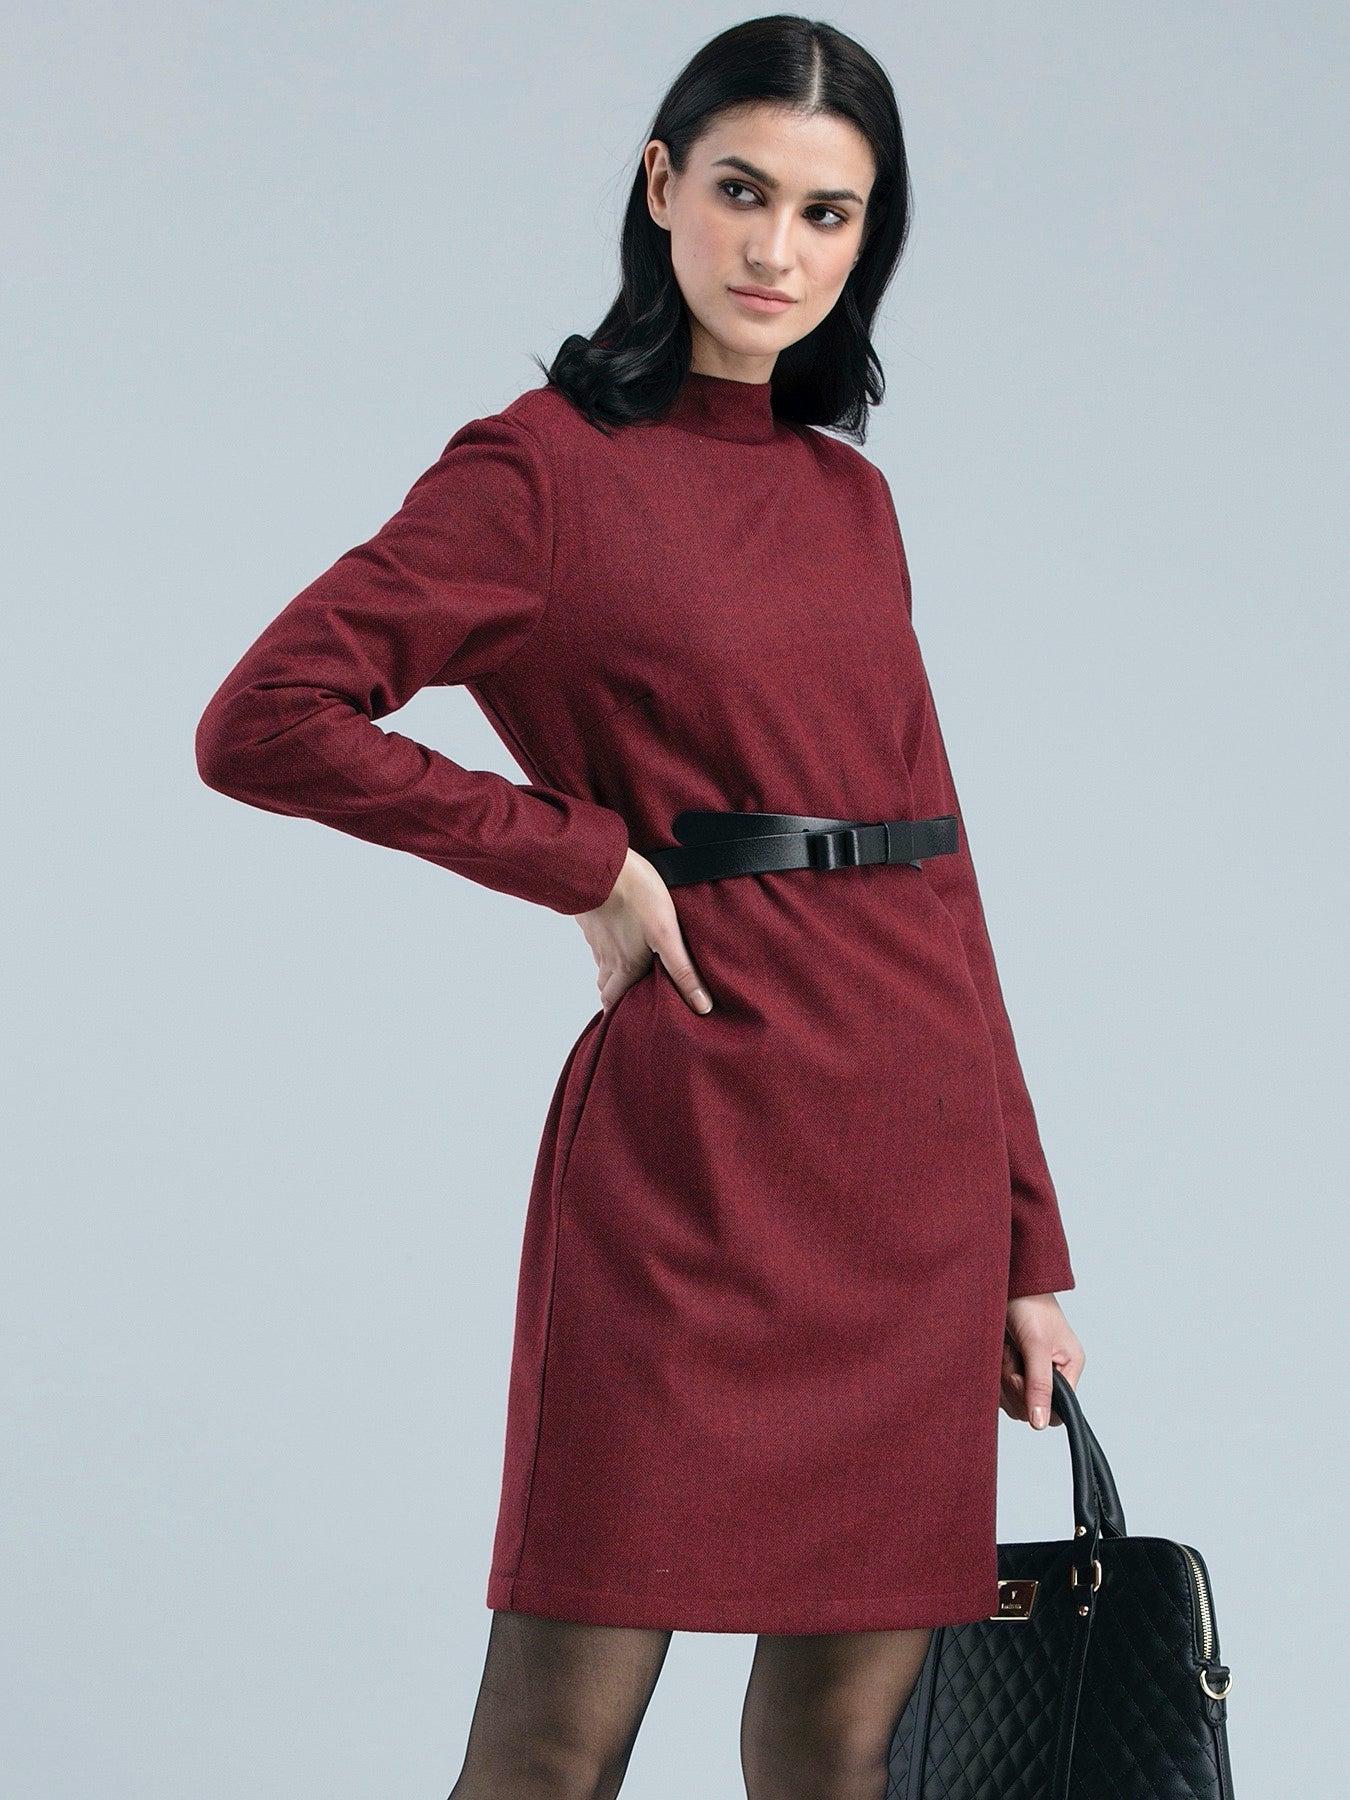 Tweed Collared Shift Dress - Red| Formal Dresses